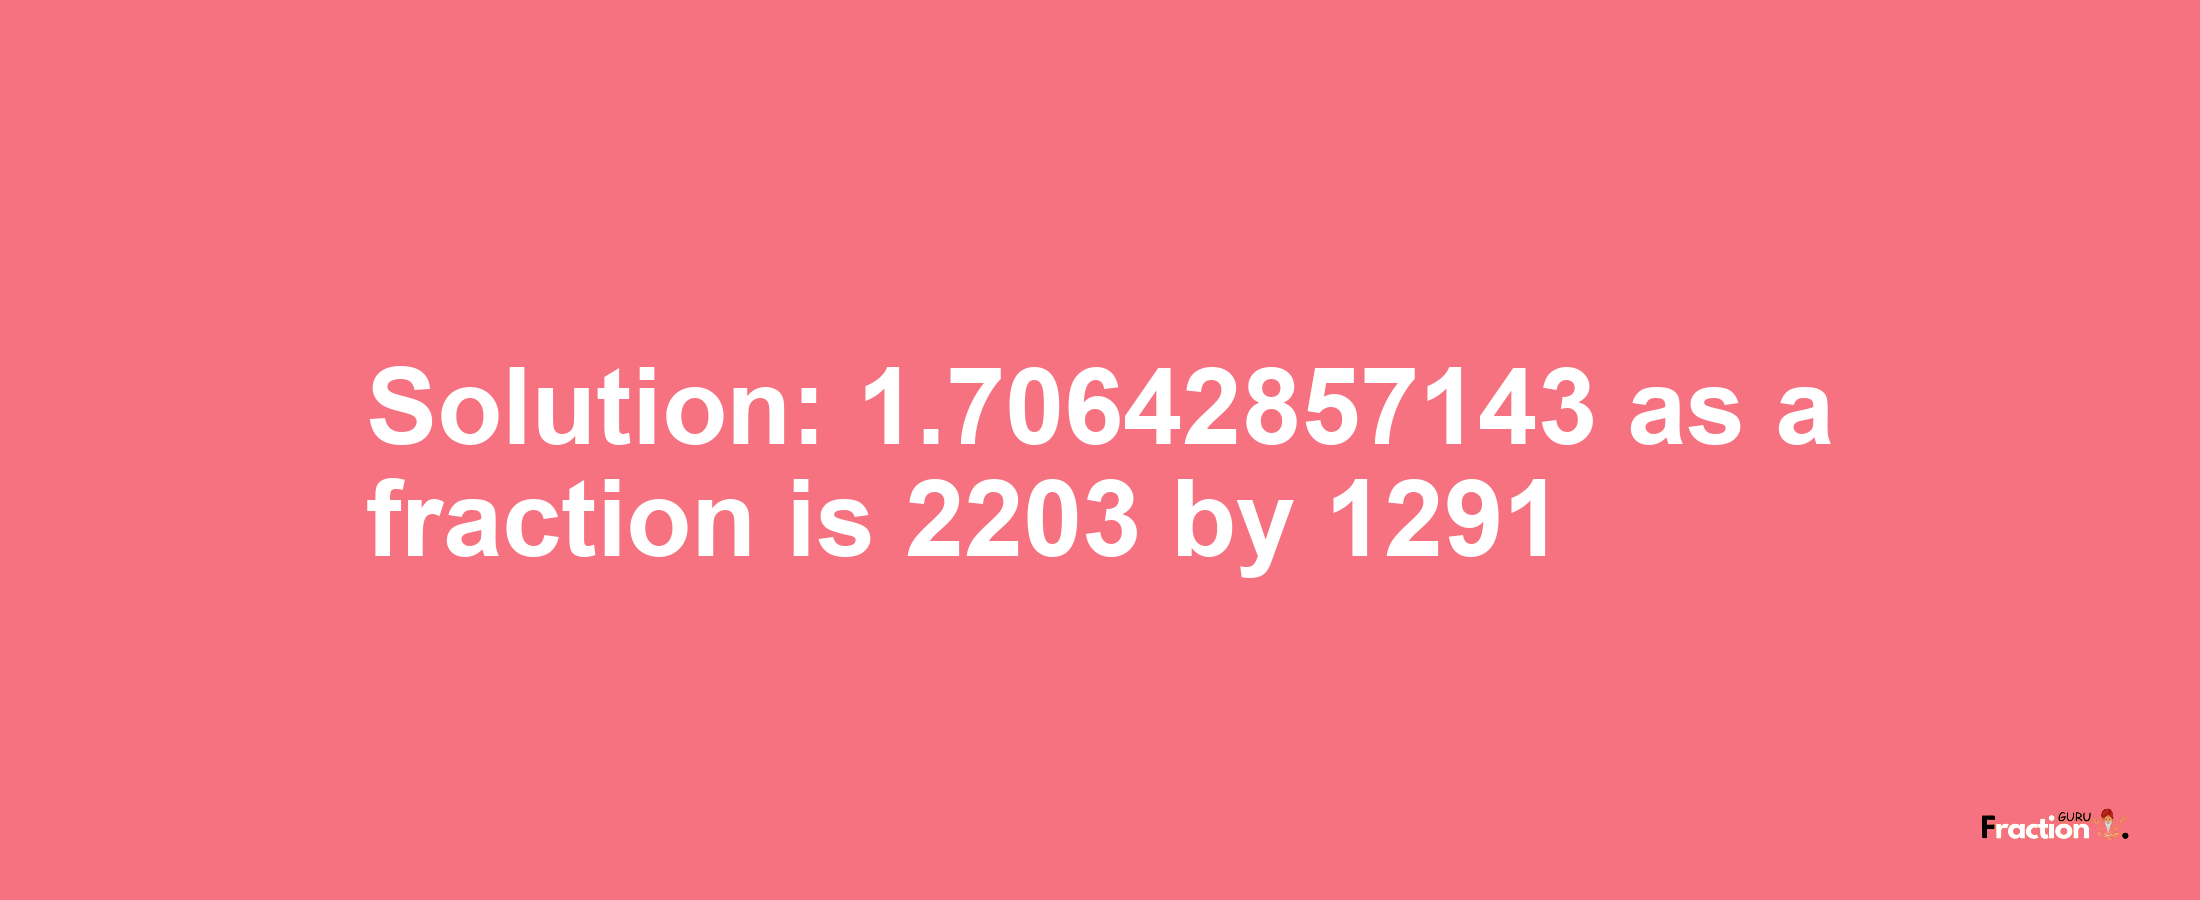 Solution:1.70642857143 as a fraction is 2203/1291